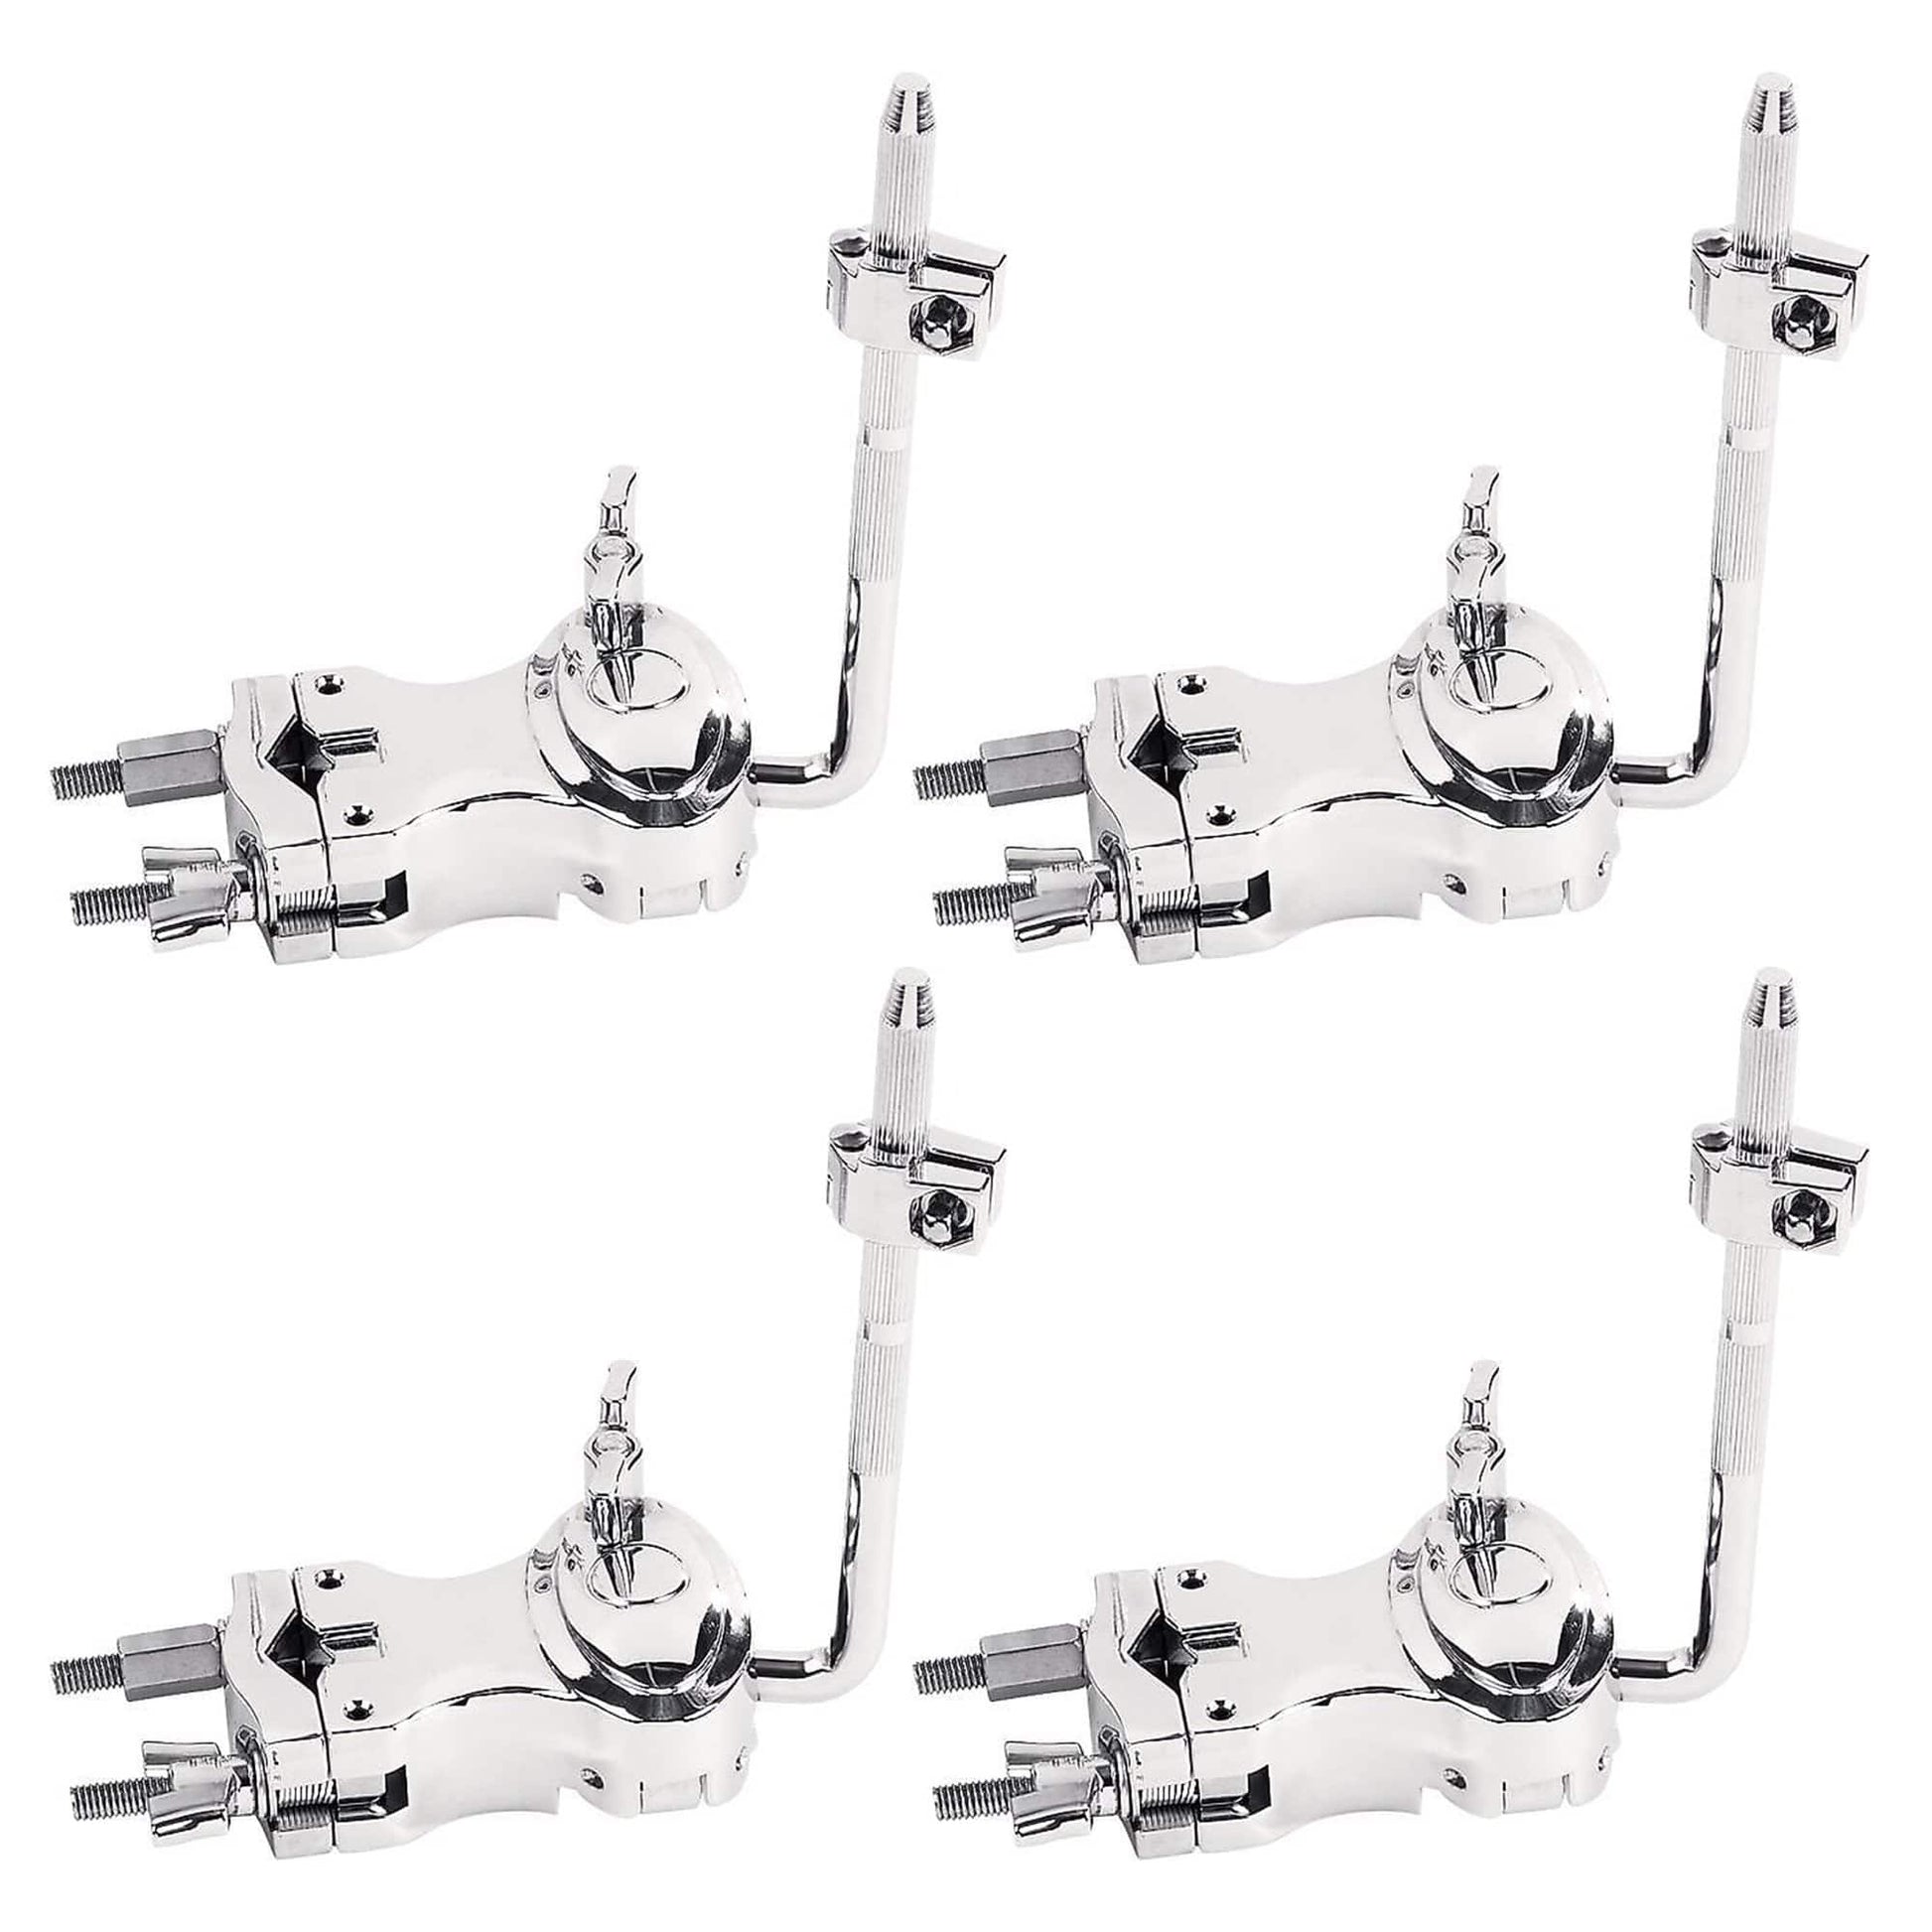 DW Single Tom Clamp DWSM991 (4 Pack Bundle) Drums and Percussion / Parts and Accessories / Mounts